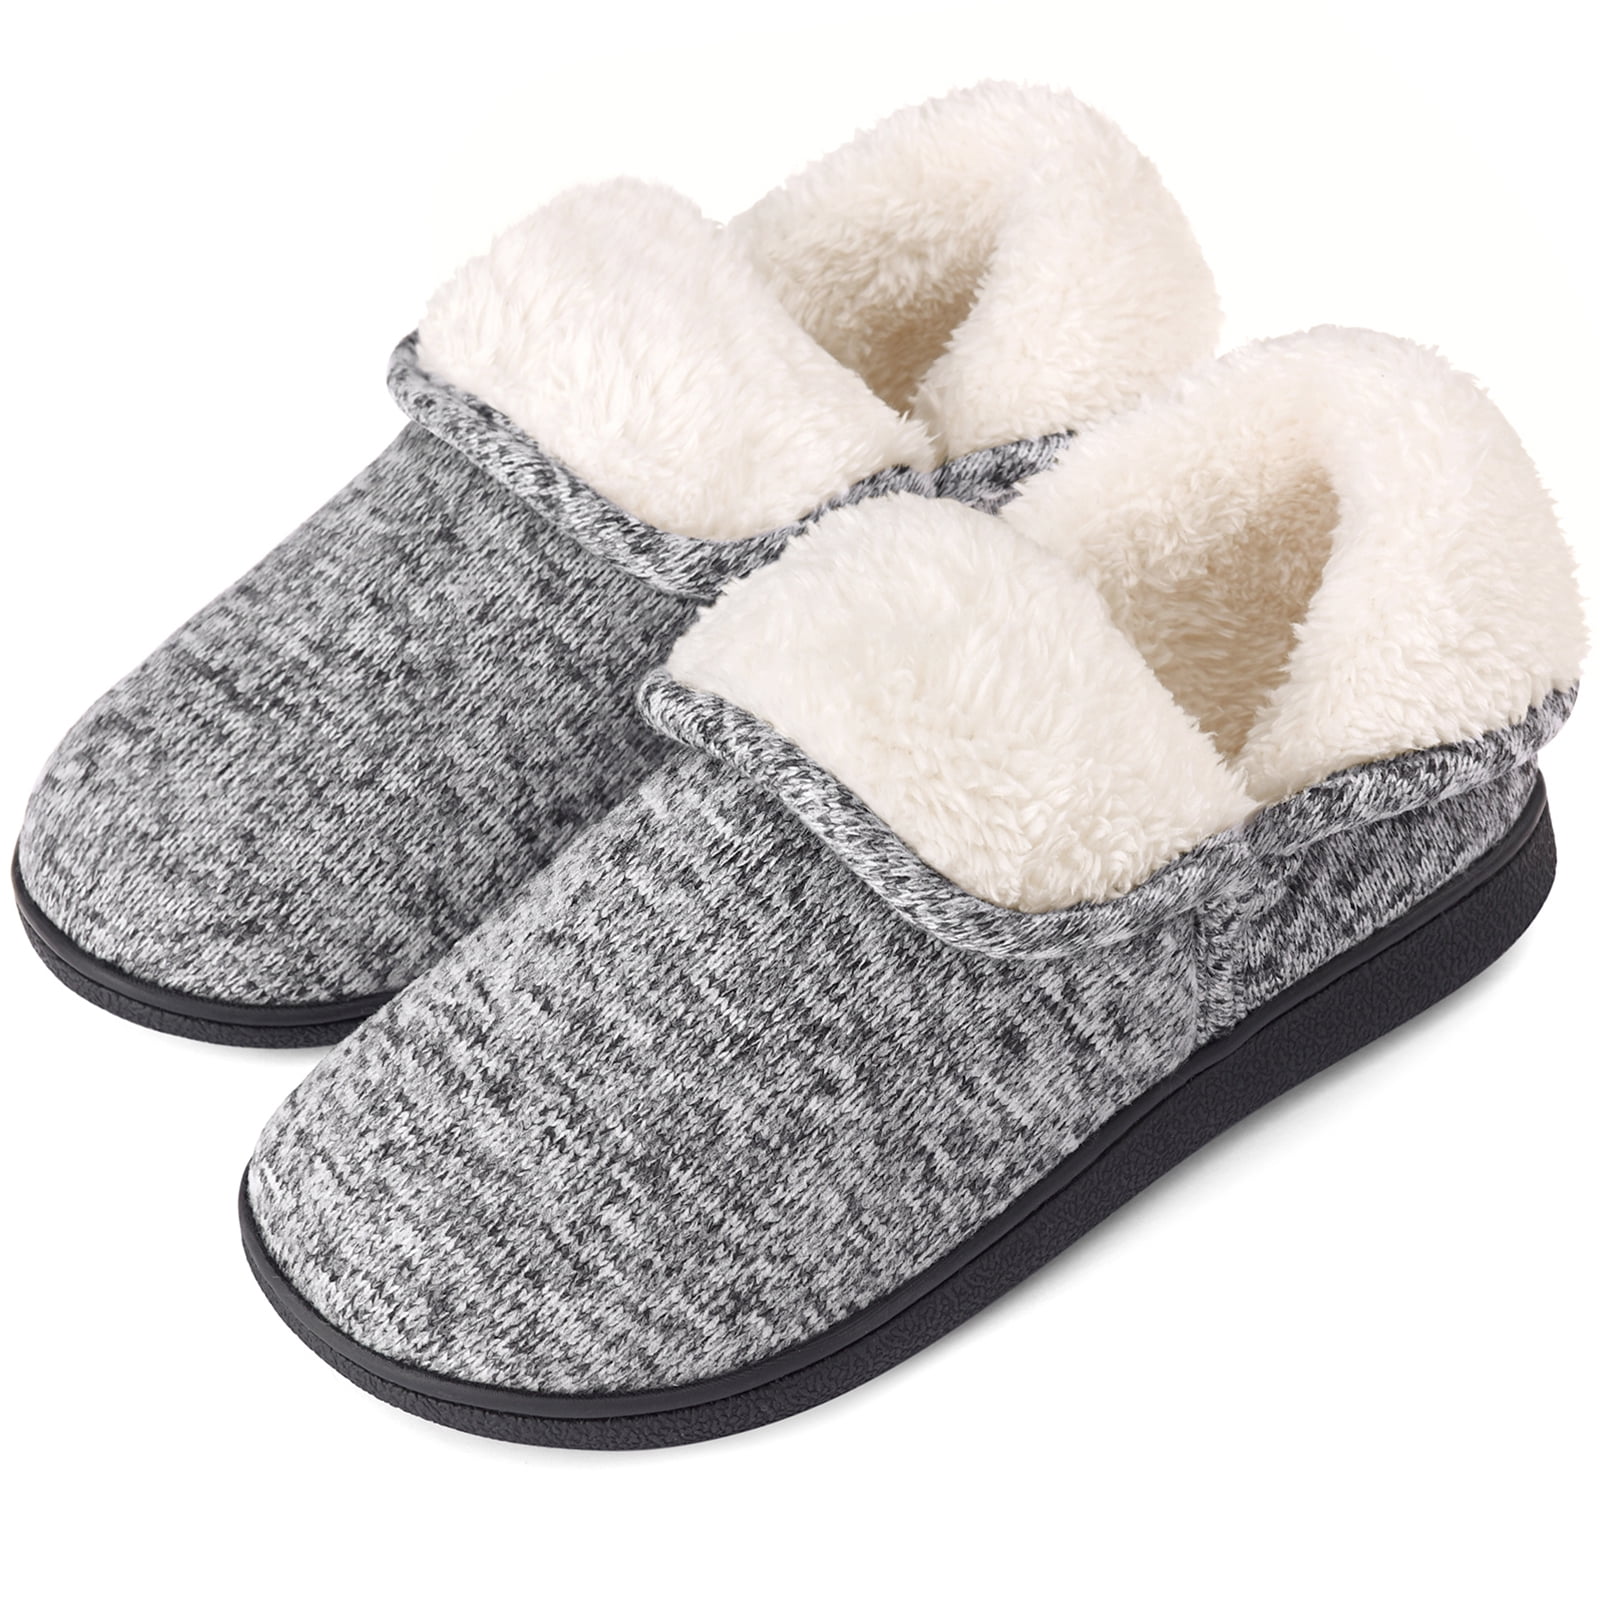 LADIES WOMENS WARM FLEECE LINING MEMORY FOAM BOOTS ANKLE BOOTEE SLIPPERS SHOES 